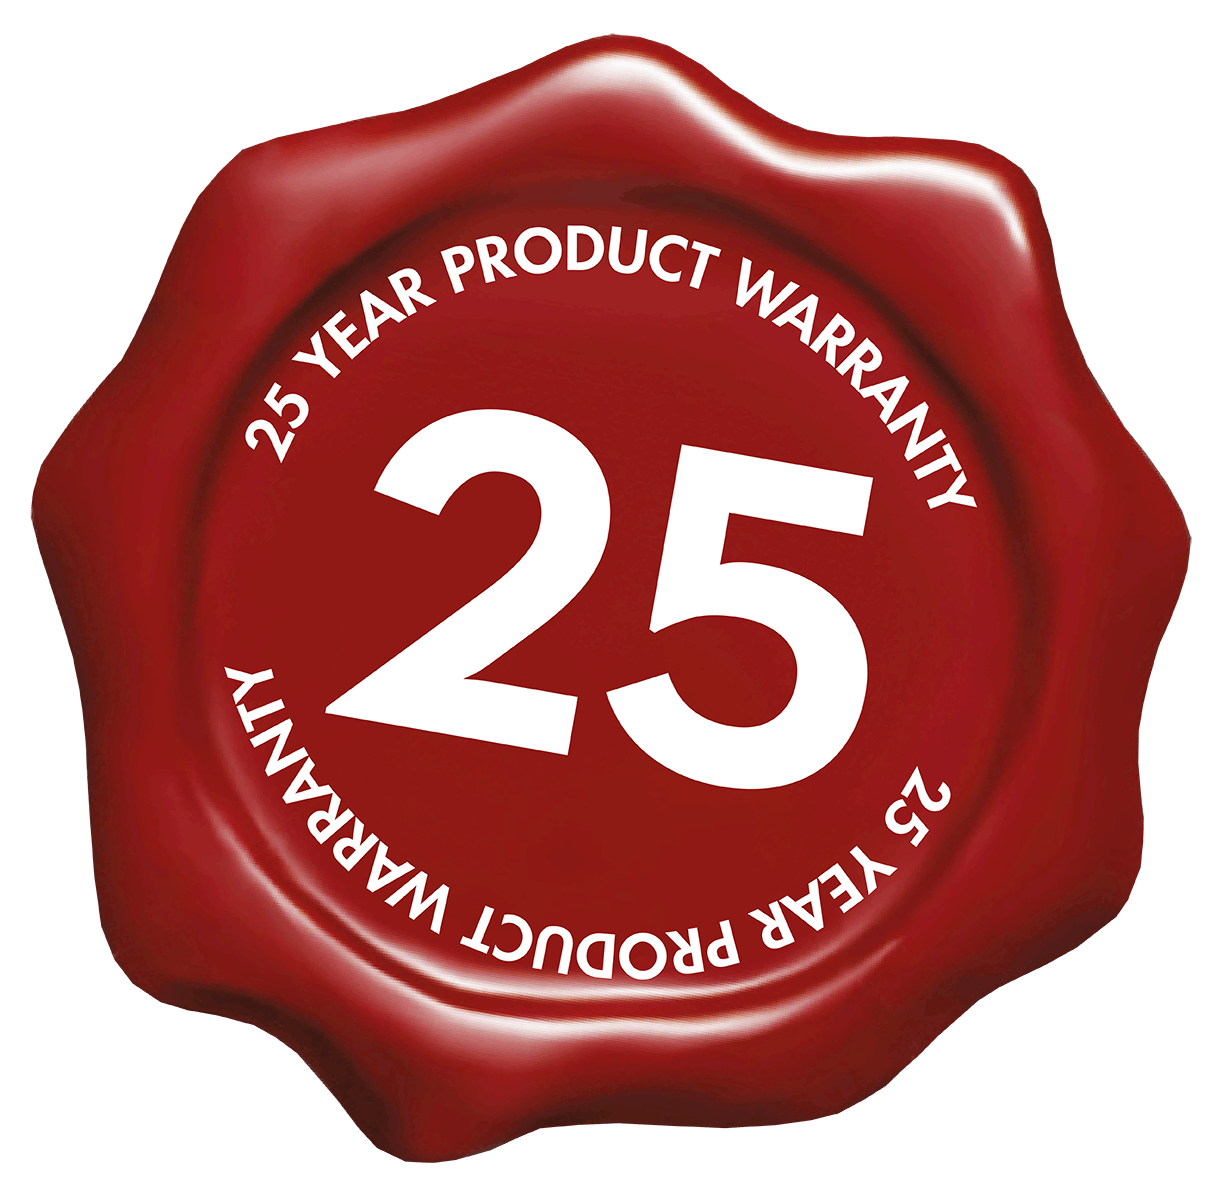 The Shower Repair Centre offers 25 year product warranty